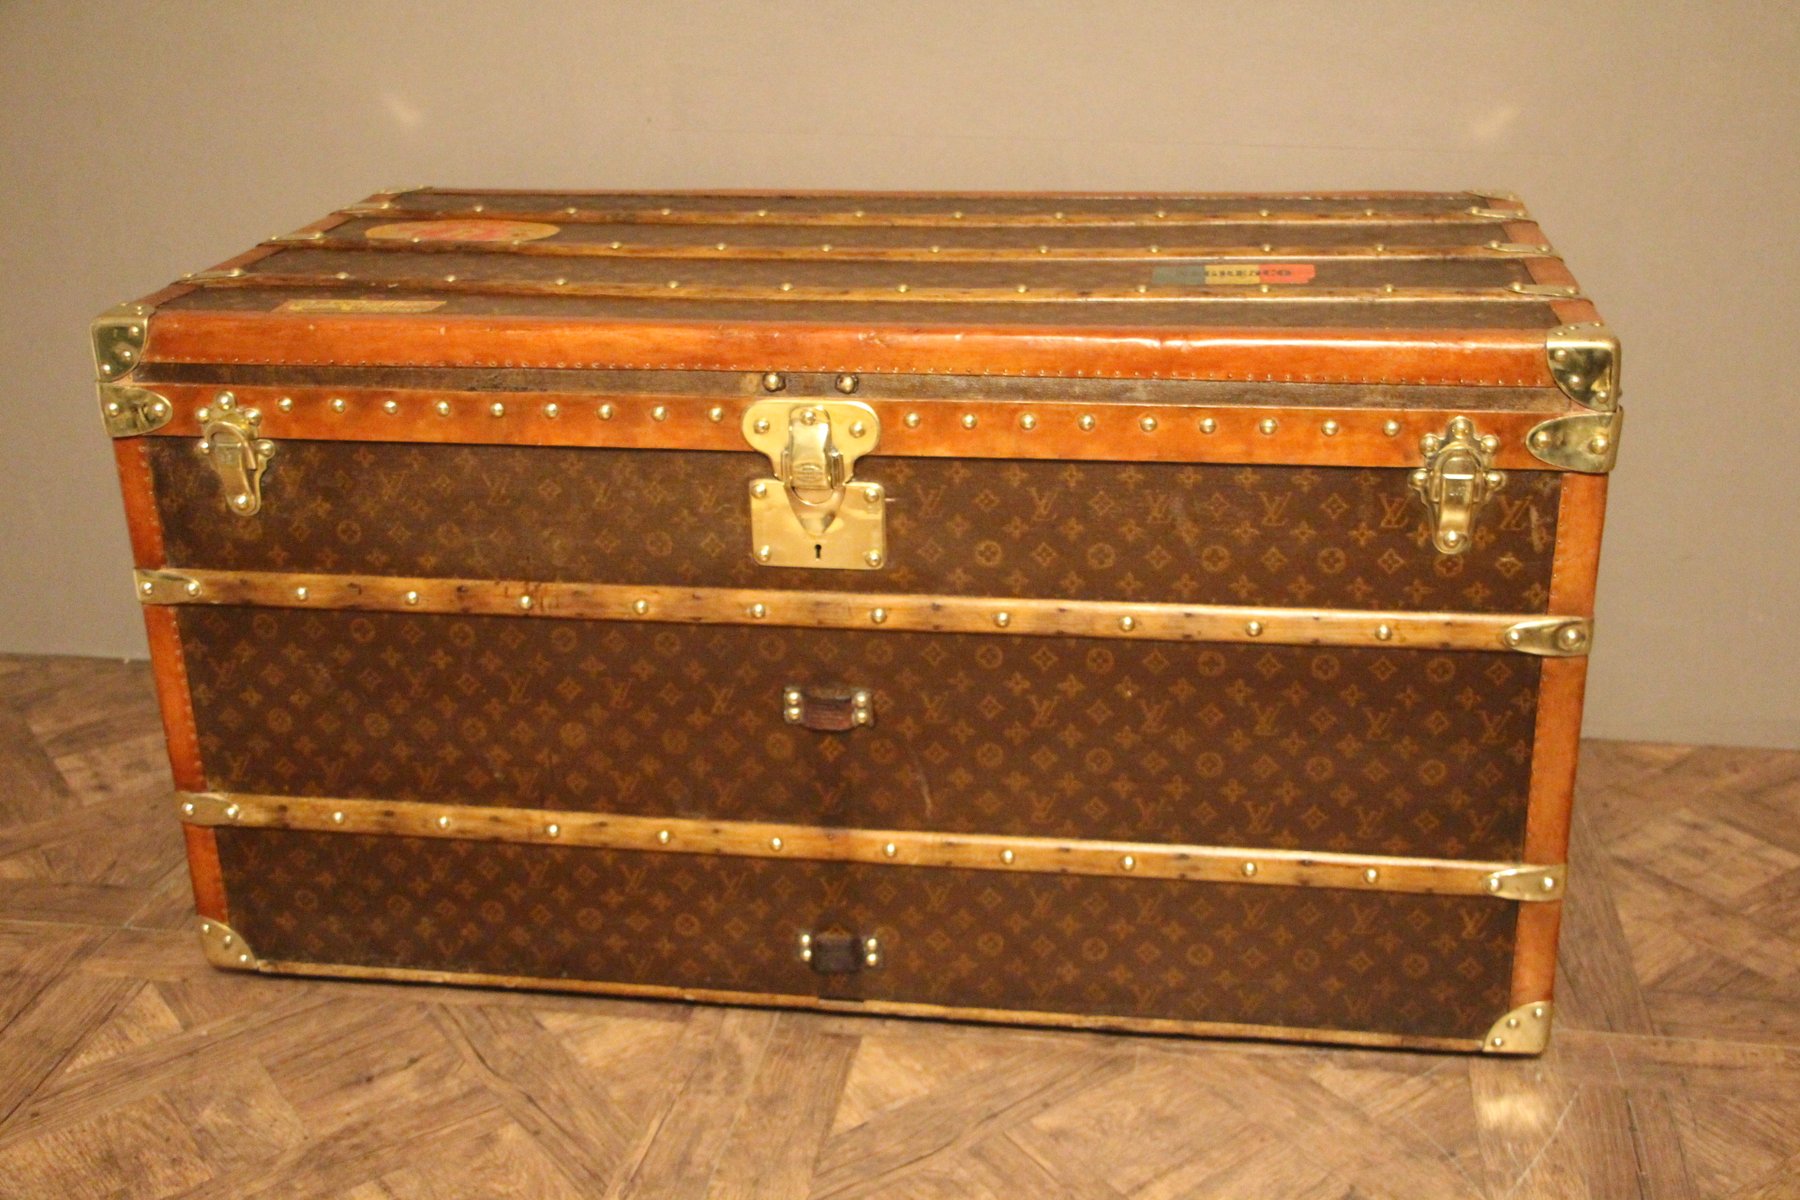 Monogram Trunk by Louis Vuitton, 1930s for sale at Pamono